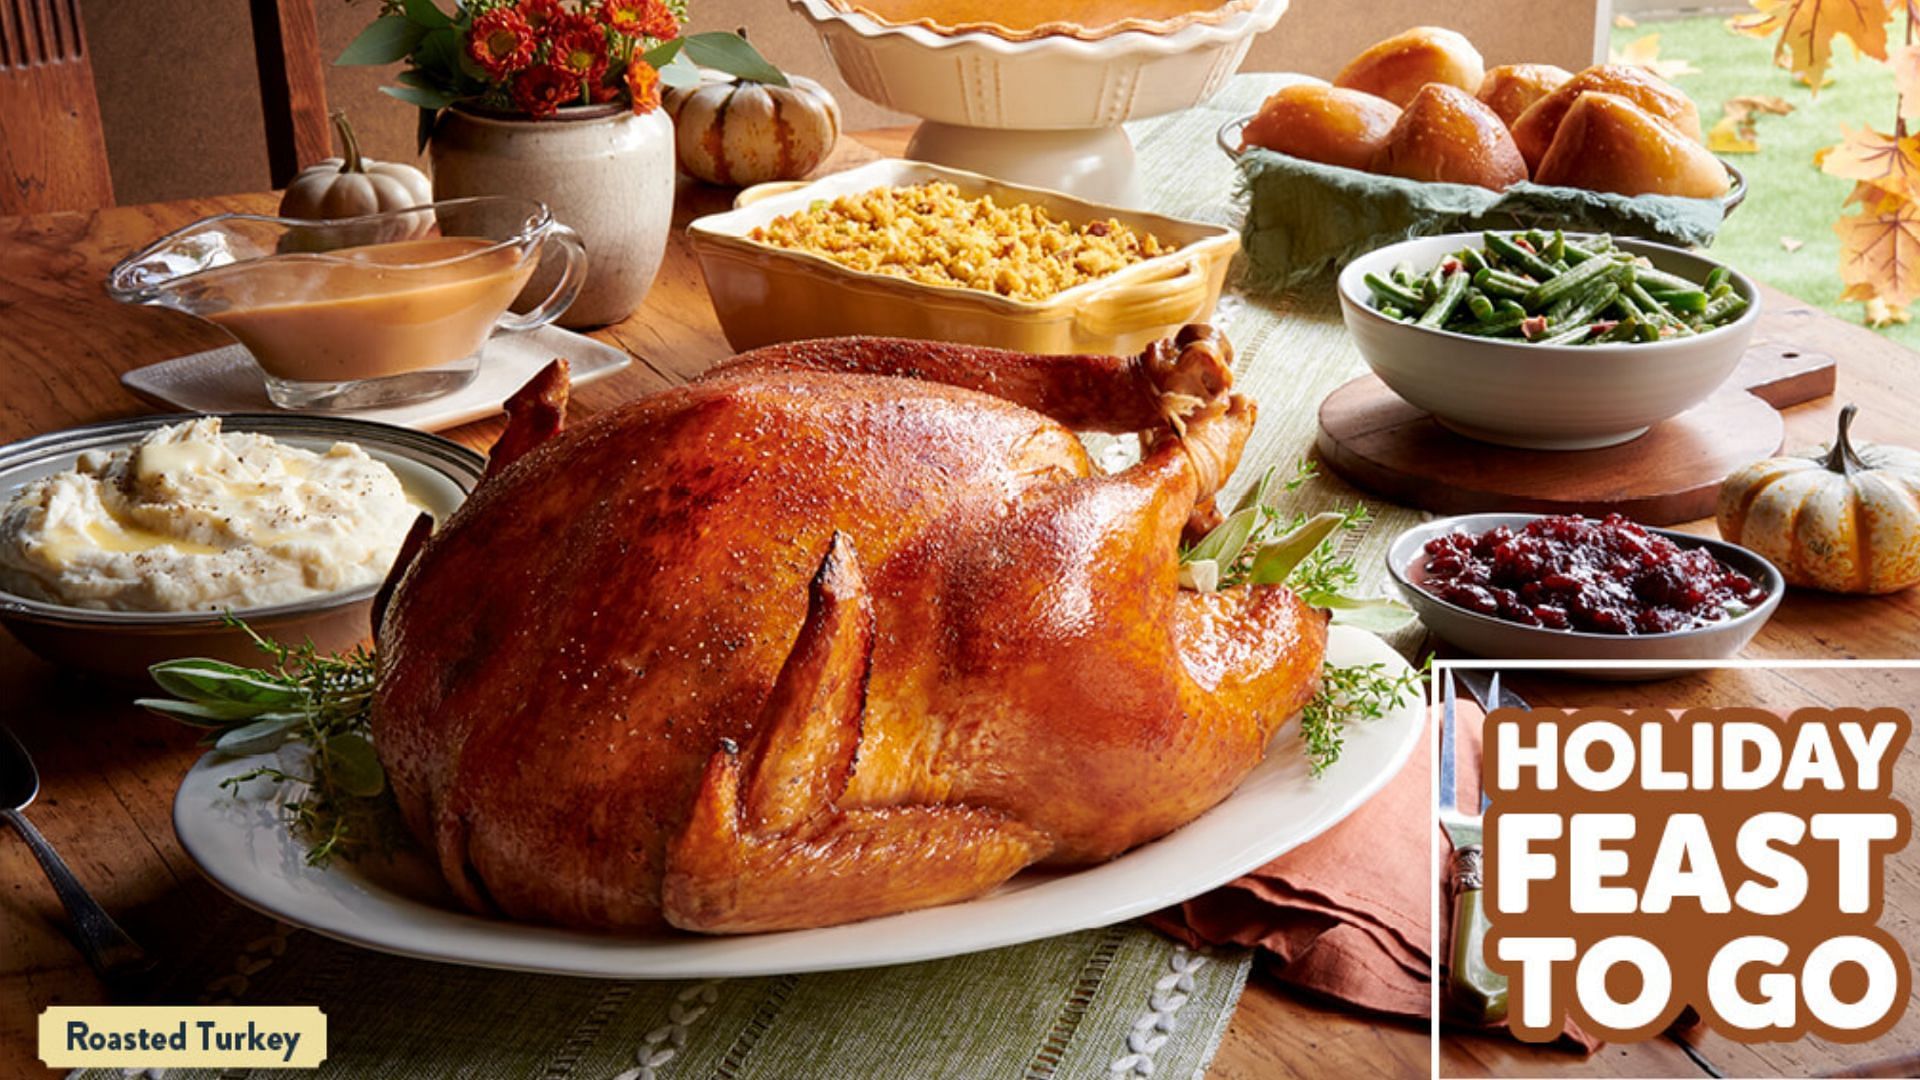 Whole Roasted Turkey Meal (Image via Golden Corral)